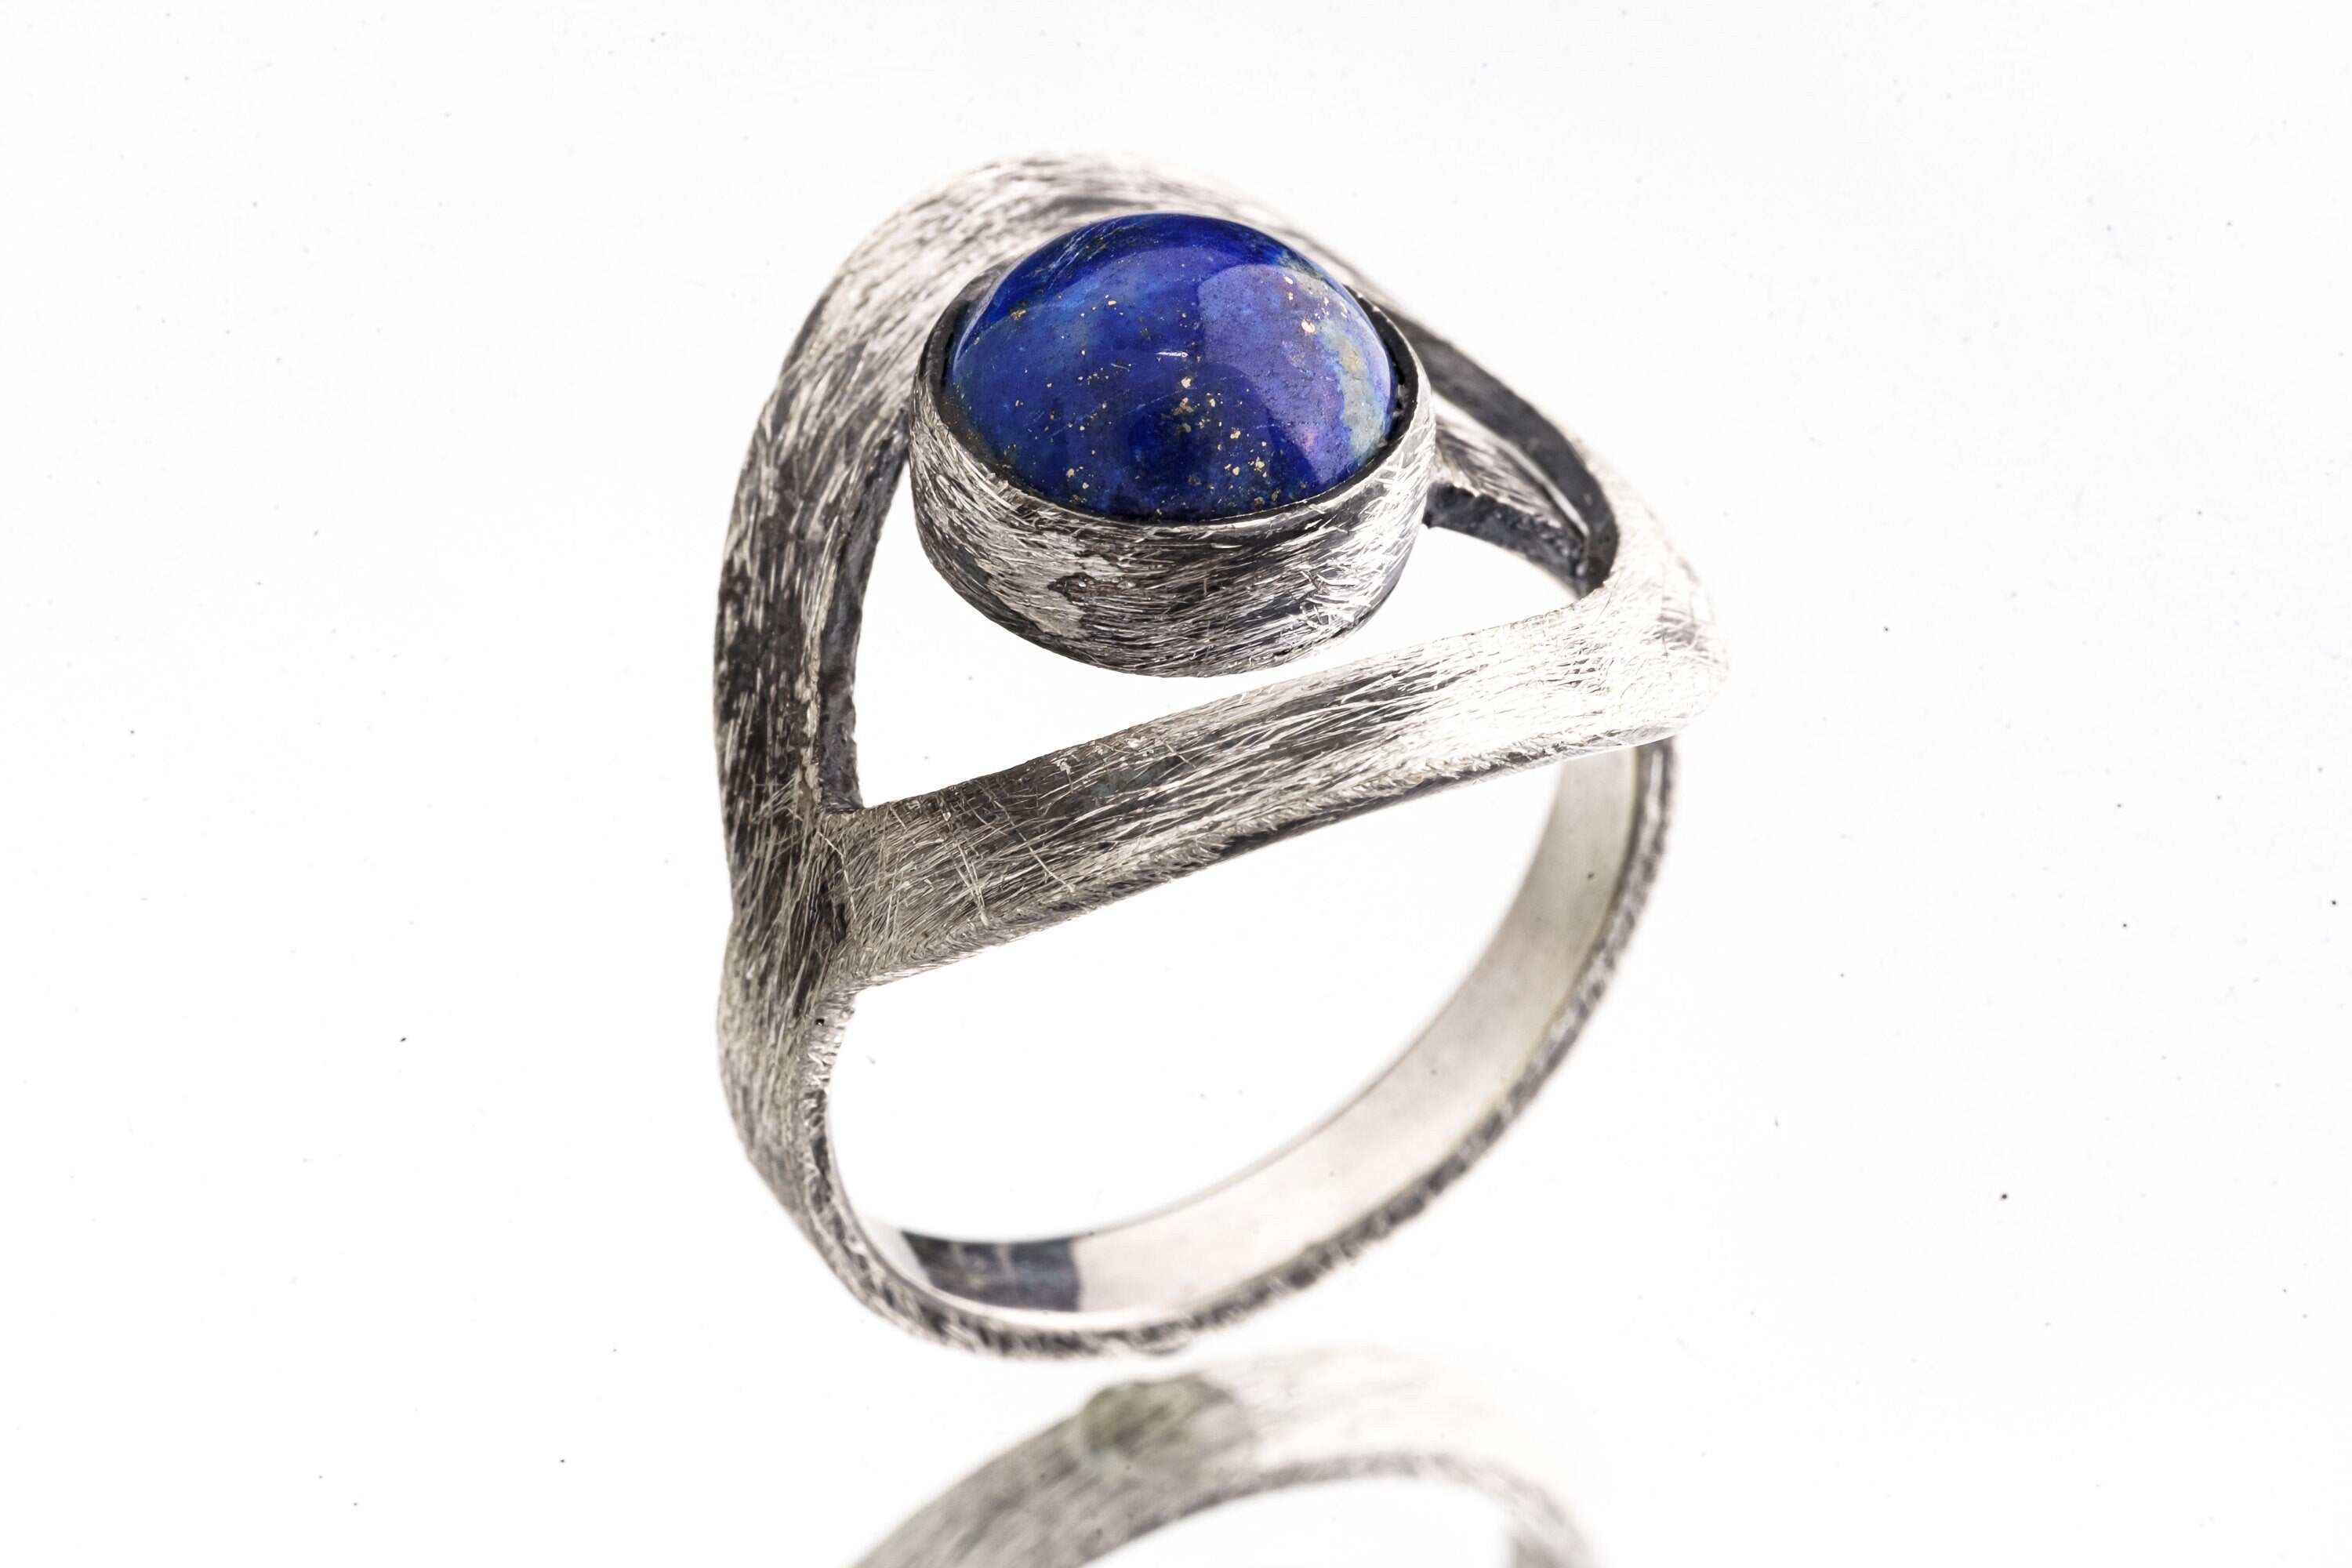 Round Lapis Lazuli - 925 Sterling Silver - Heavy Set Adjustable Loop Ring - Scratch Textured - Size 5-9 US - NO/21